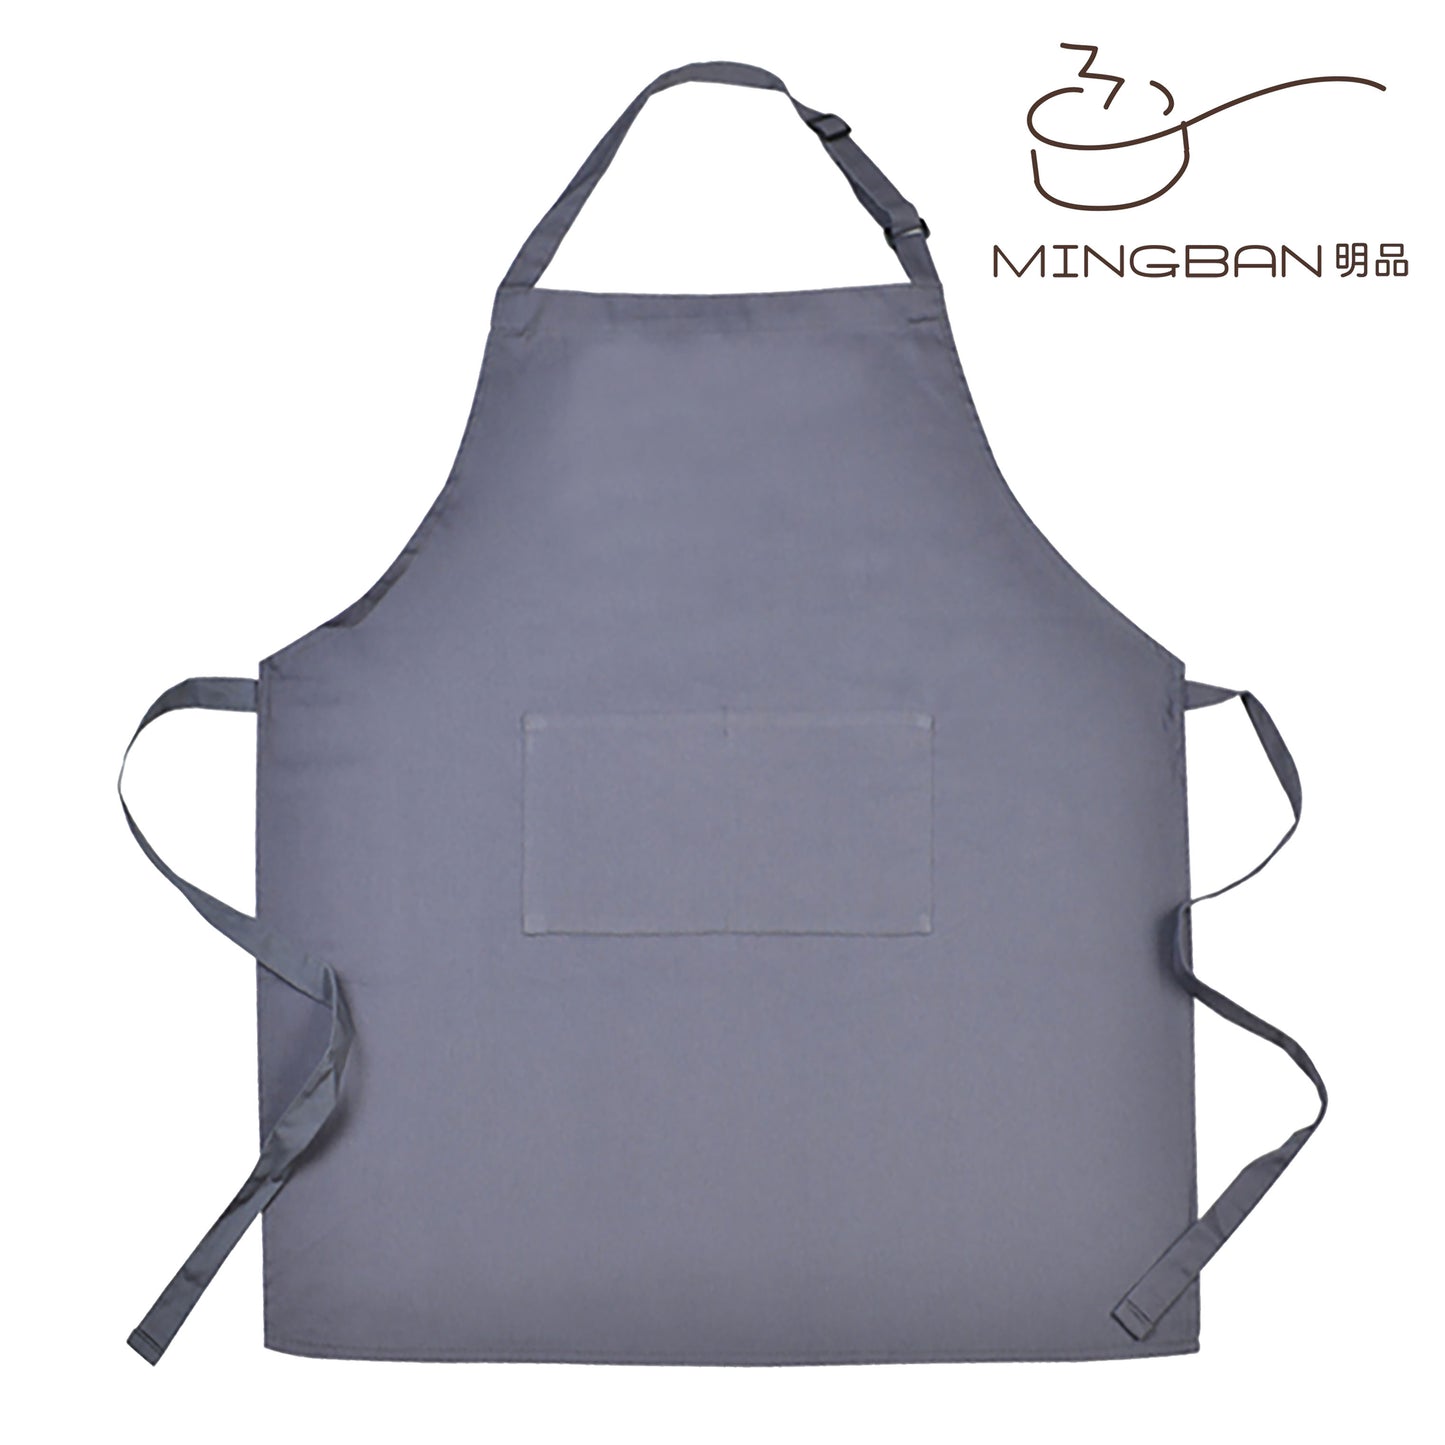 Waterproof, Oil-Proof and Dirt-Resistant Cotton Apron with pocket - Gray